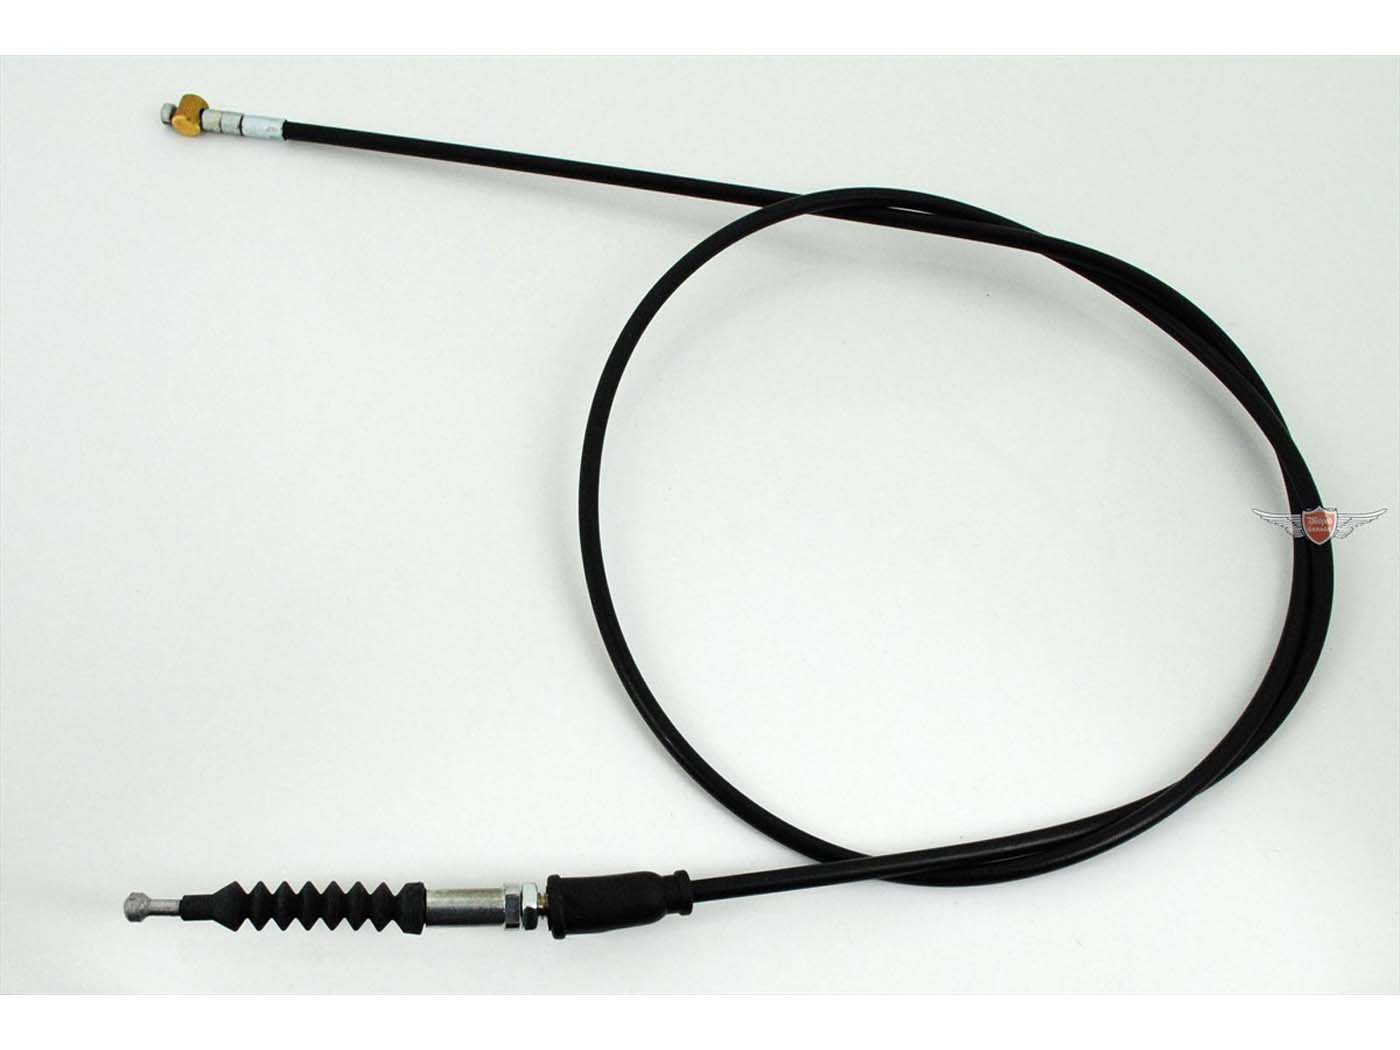 Brake Cable Scooter For Zündapp R 50, RS 50 Type 561